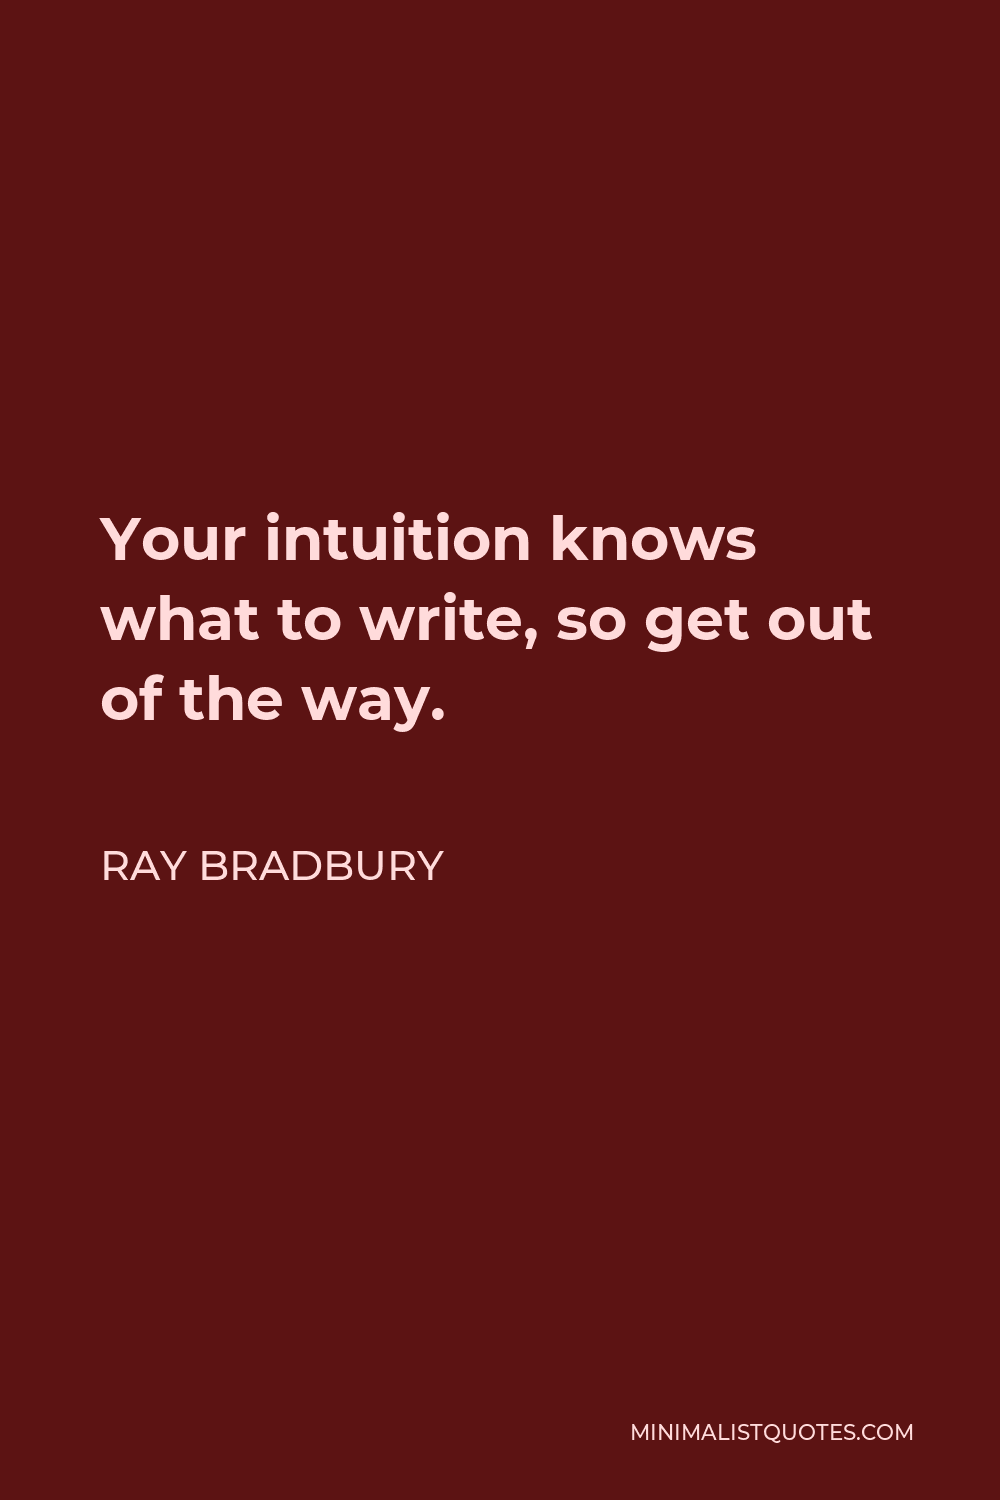 Ray Bradbury Quote - Your intuition knows what to write, so get out of the way.